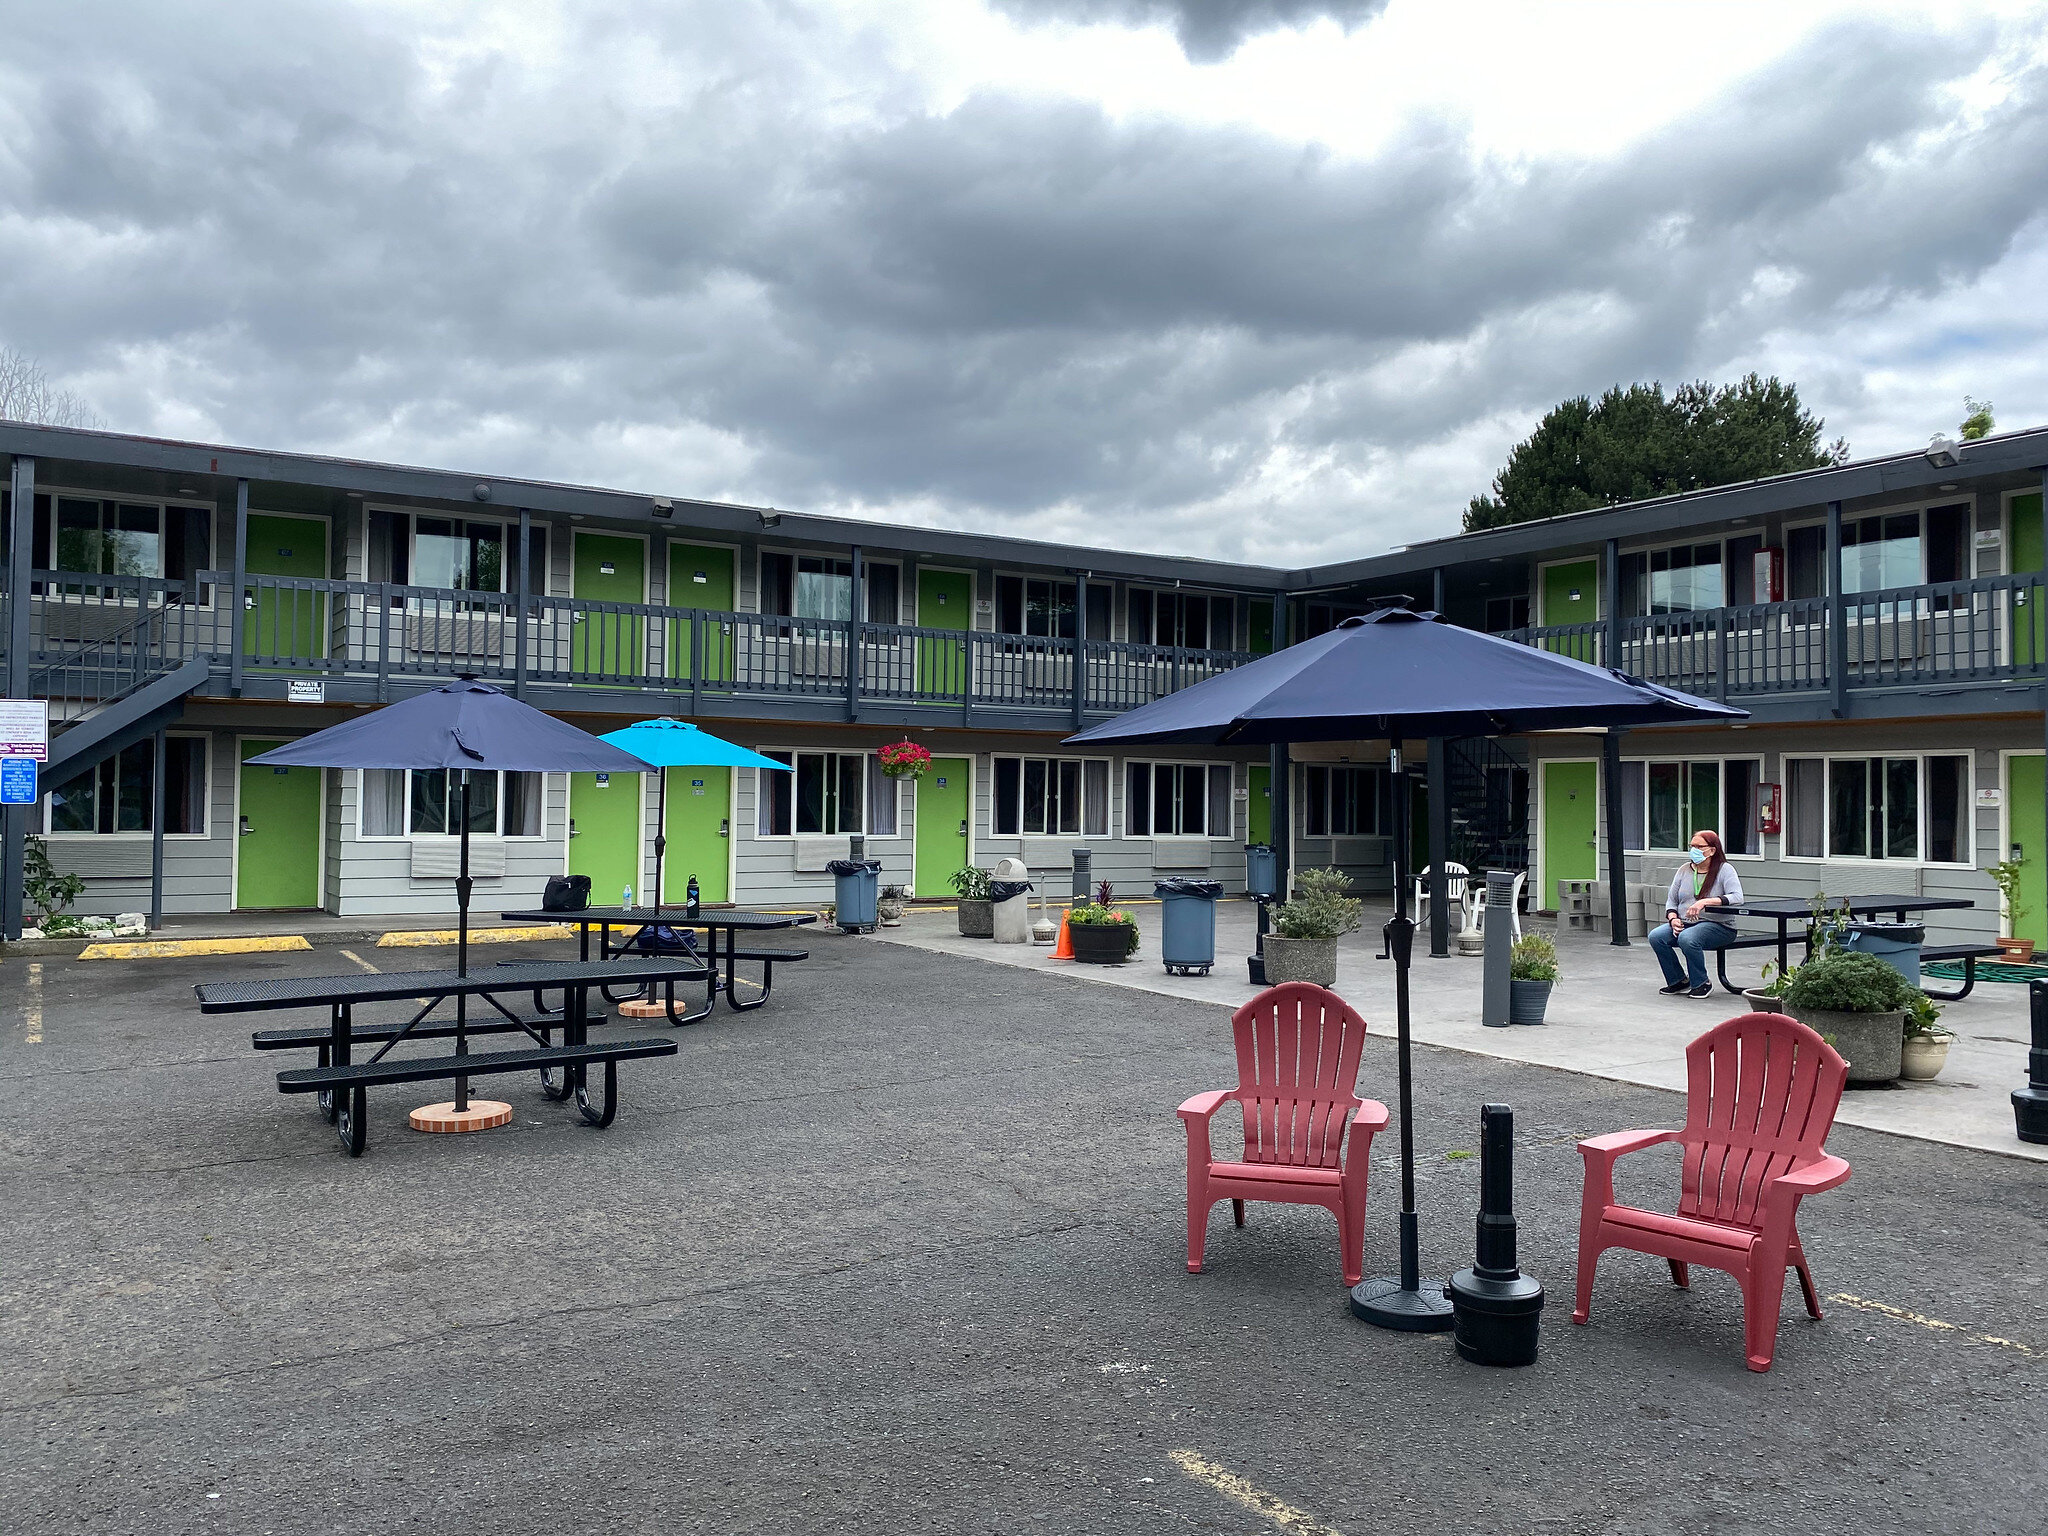 The motel shelter operated by Transition Projects at the Banfield Value Inn.